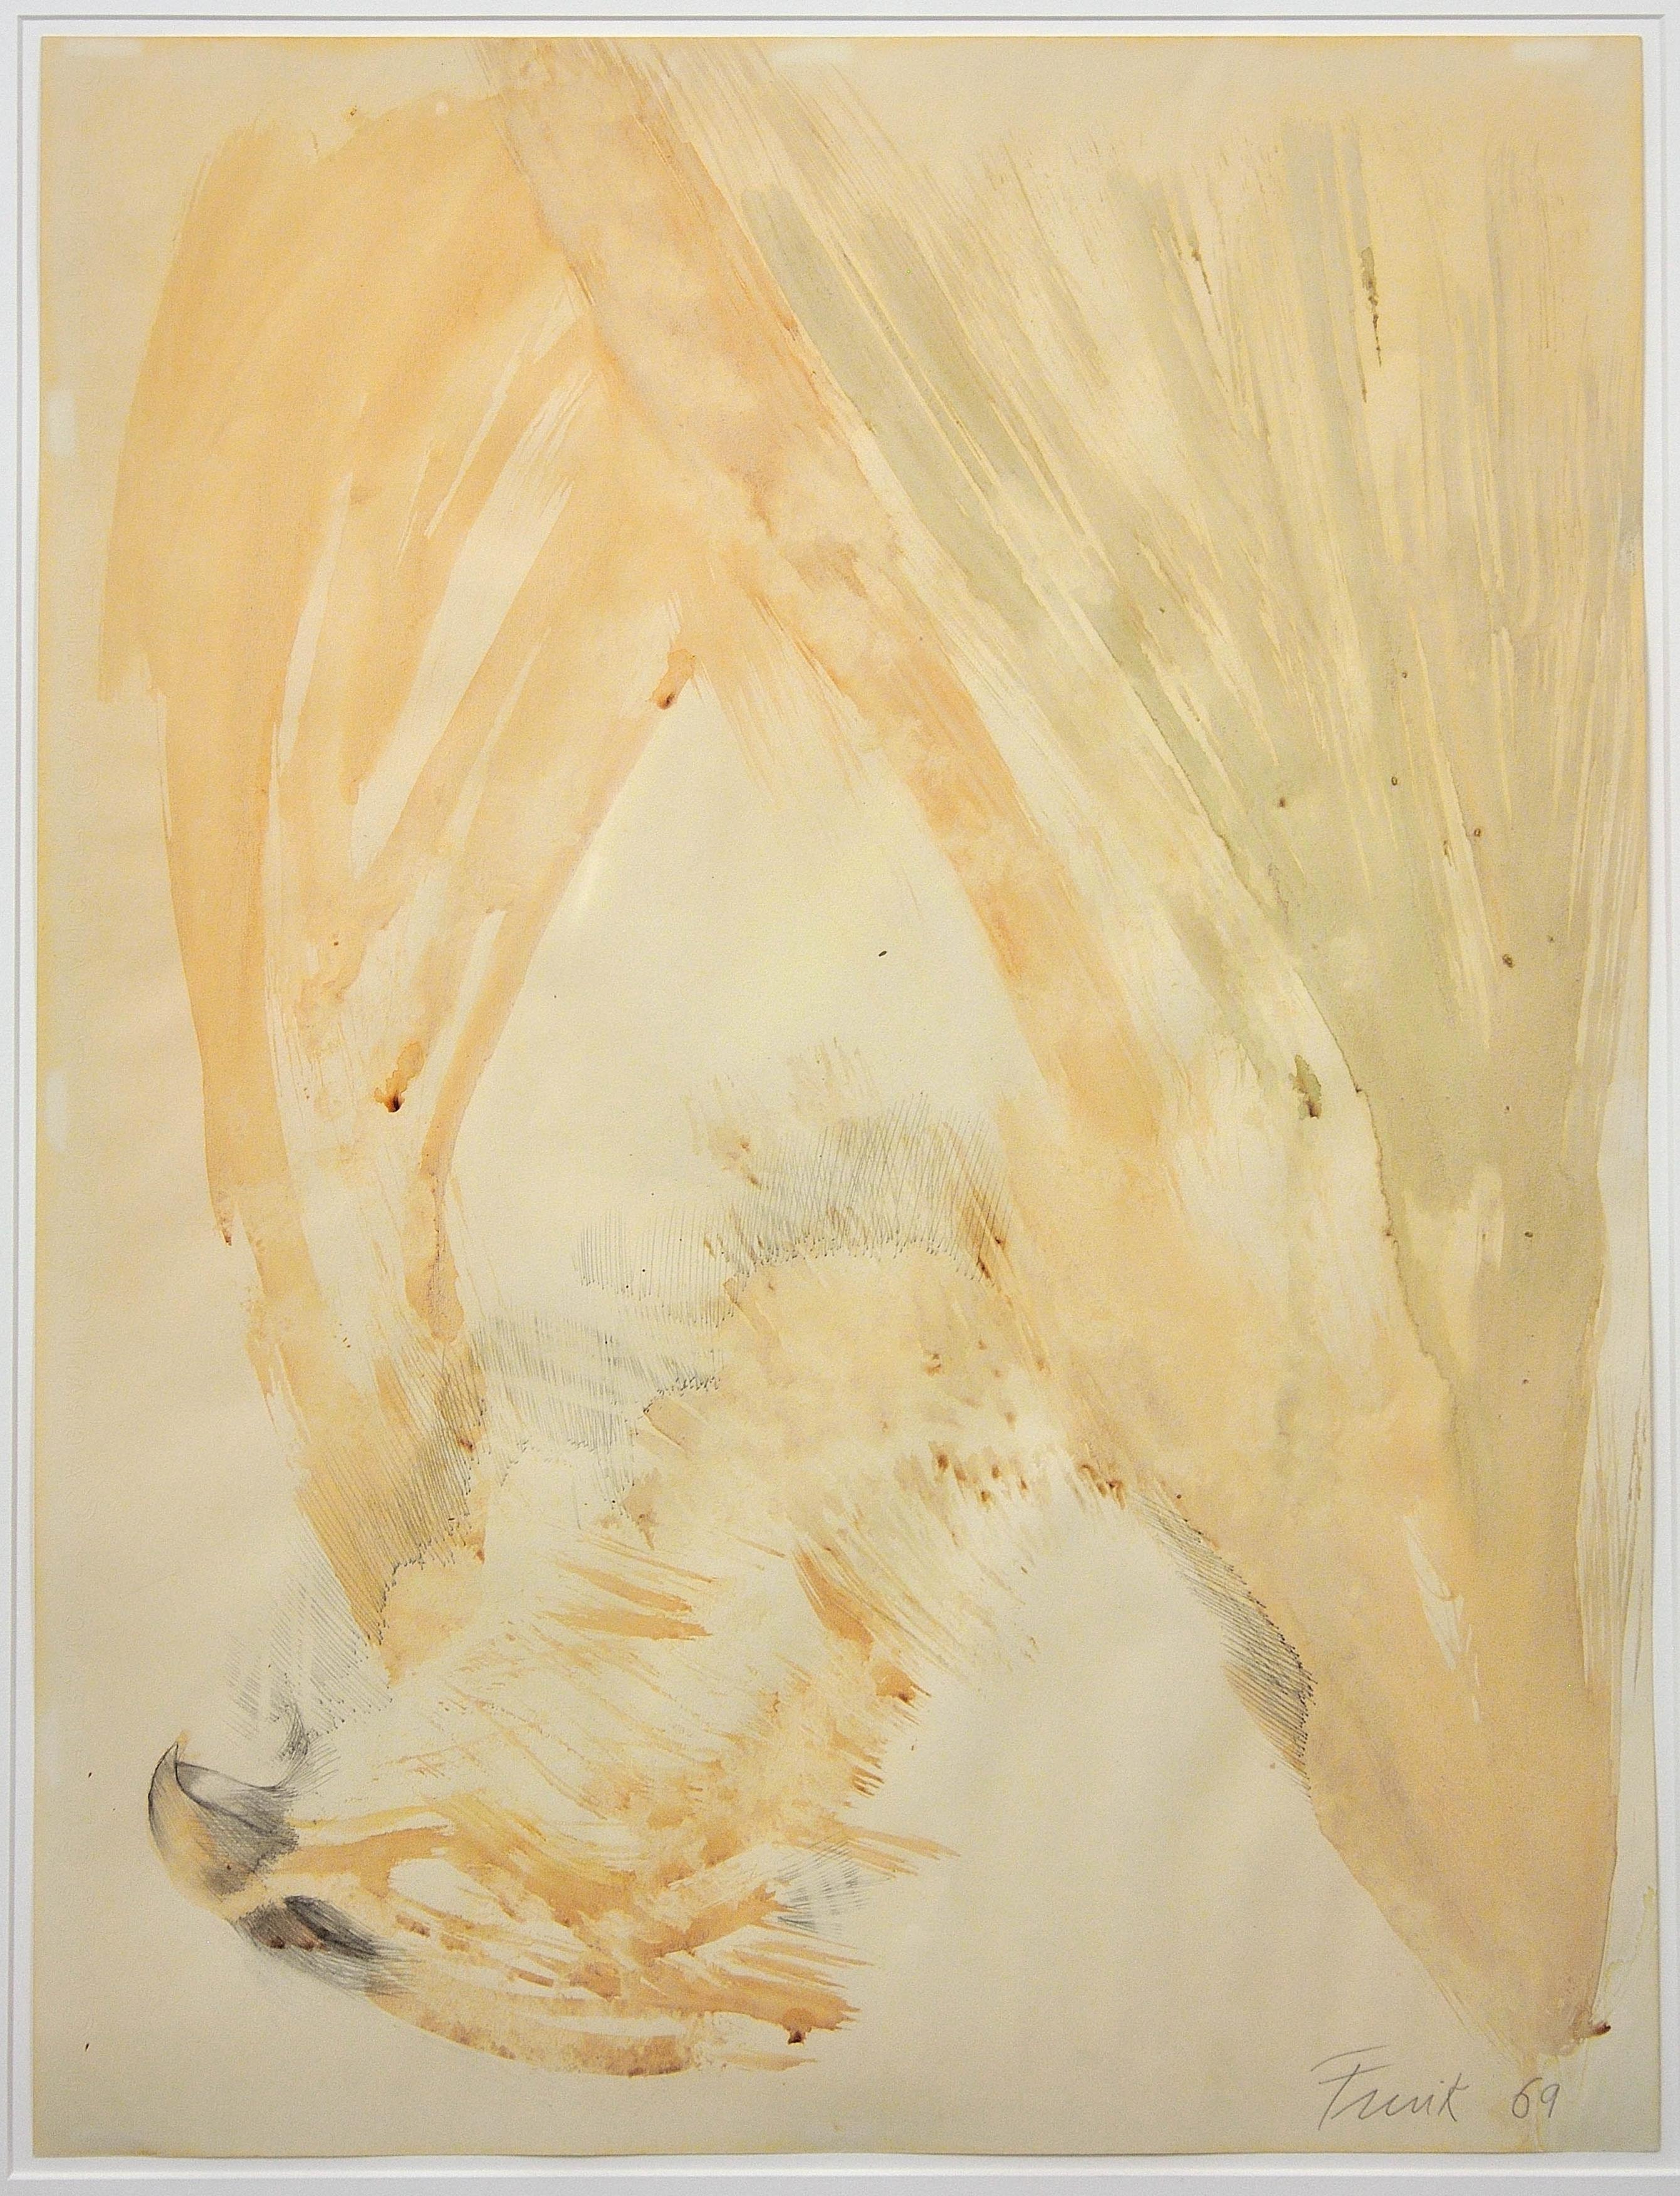 Dame Elisabeth Frink.
English ( b.1930 - d.1993 ).
Hawk, 1969.
Watercolor.
Image size 25.4 inches x 19.5 inches ( 64.5cm x 49.5cm ).
Frame size 34.4 inches x 28.1 inches ( 87.5cm x 71.5cm ).

Available for sale; this original painting is by Dame